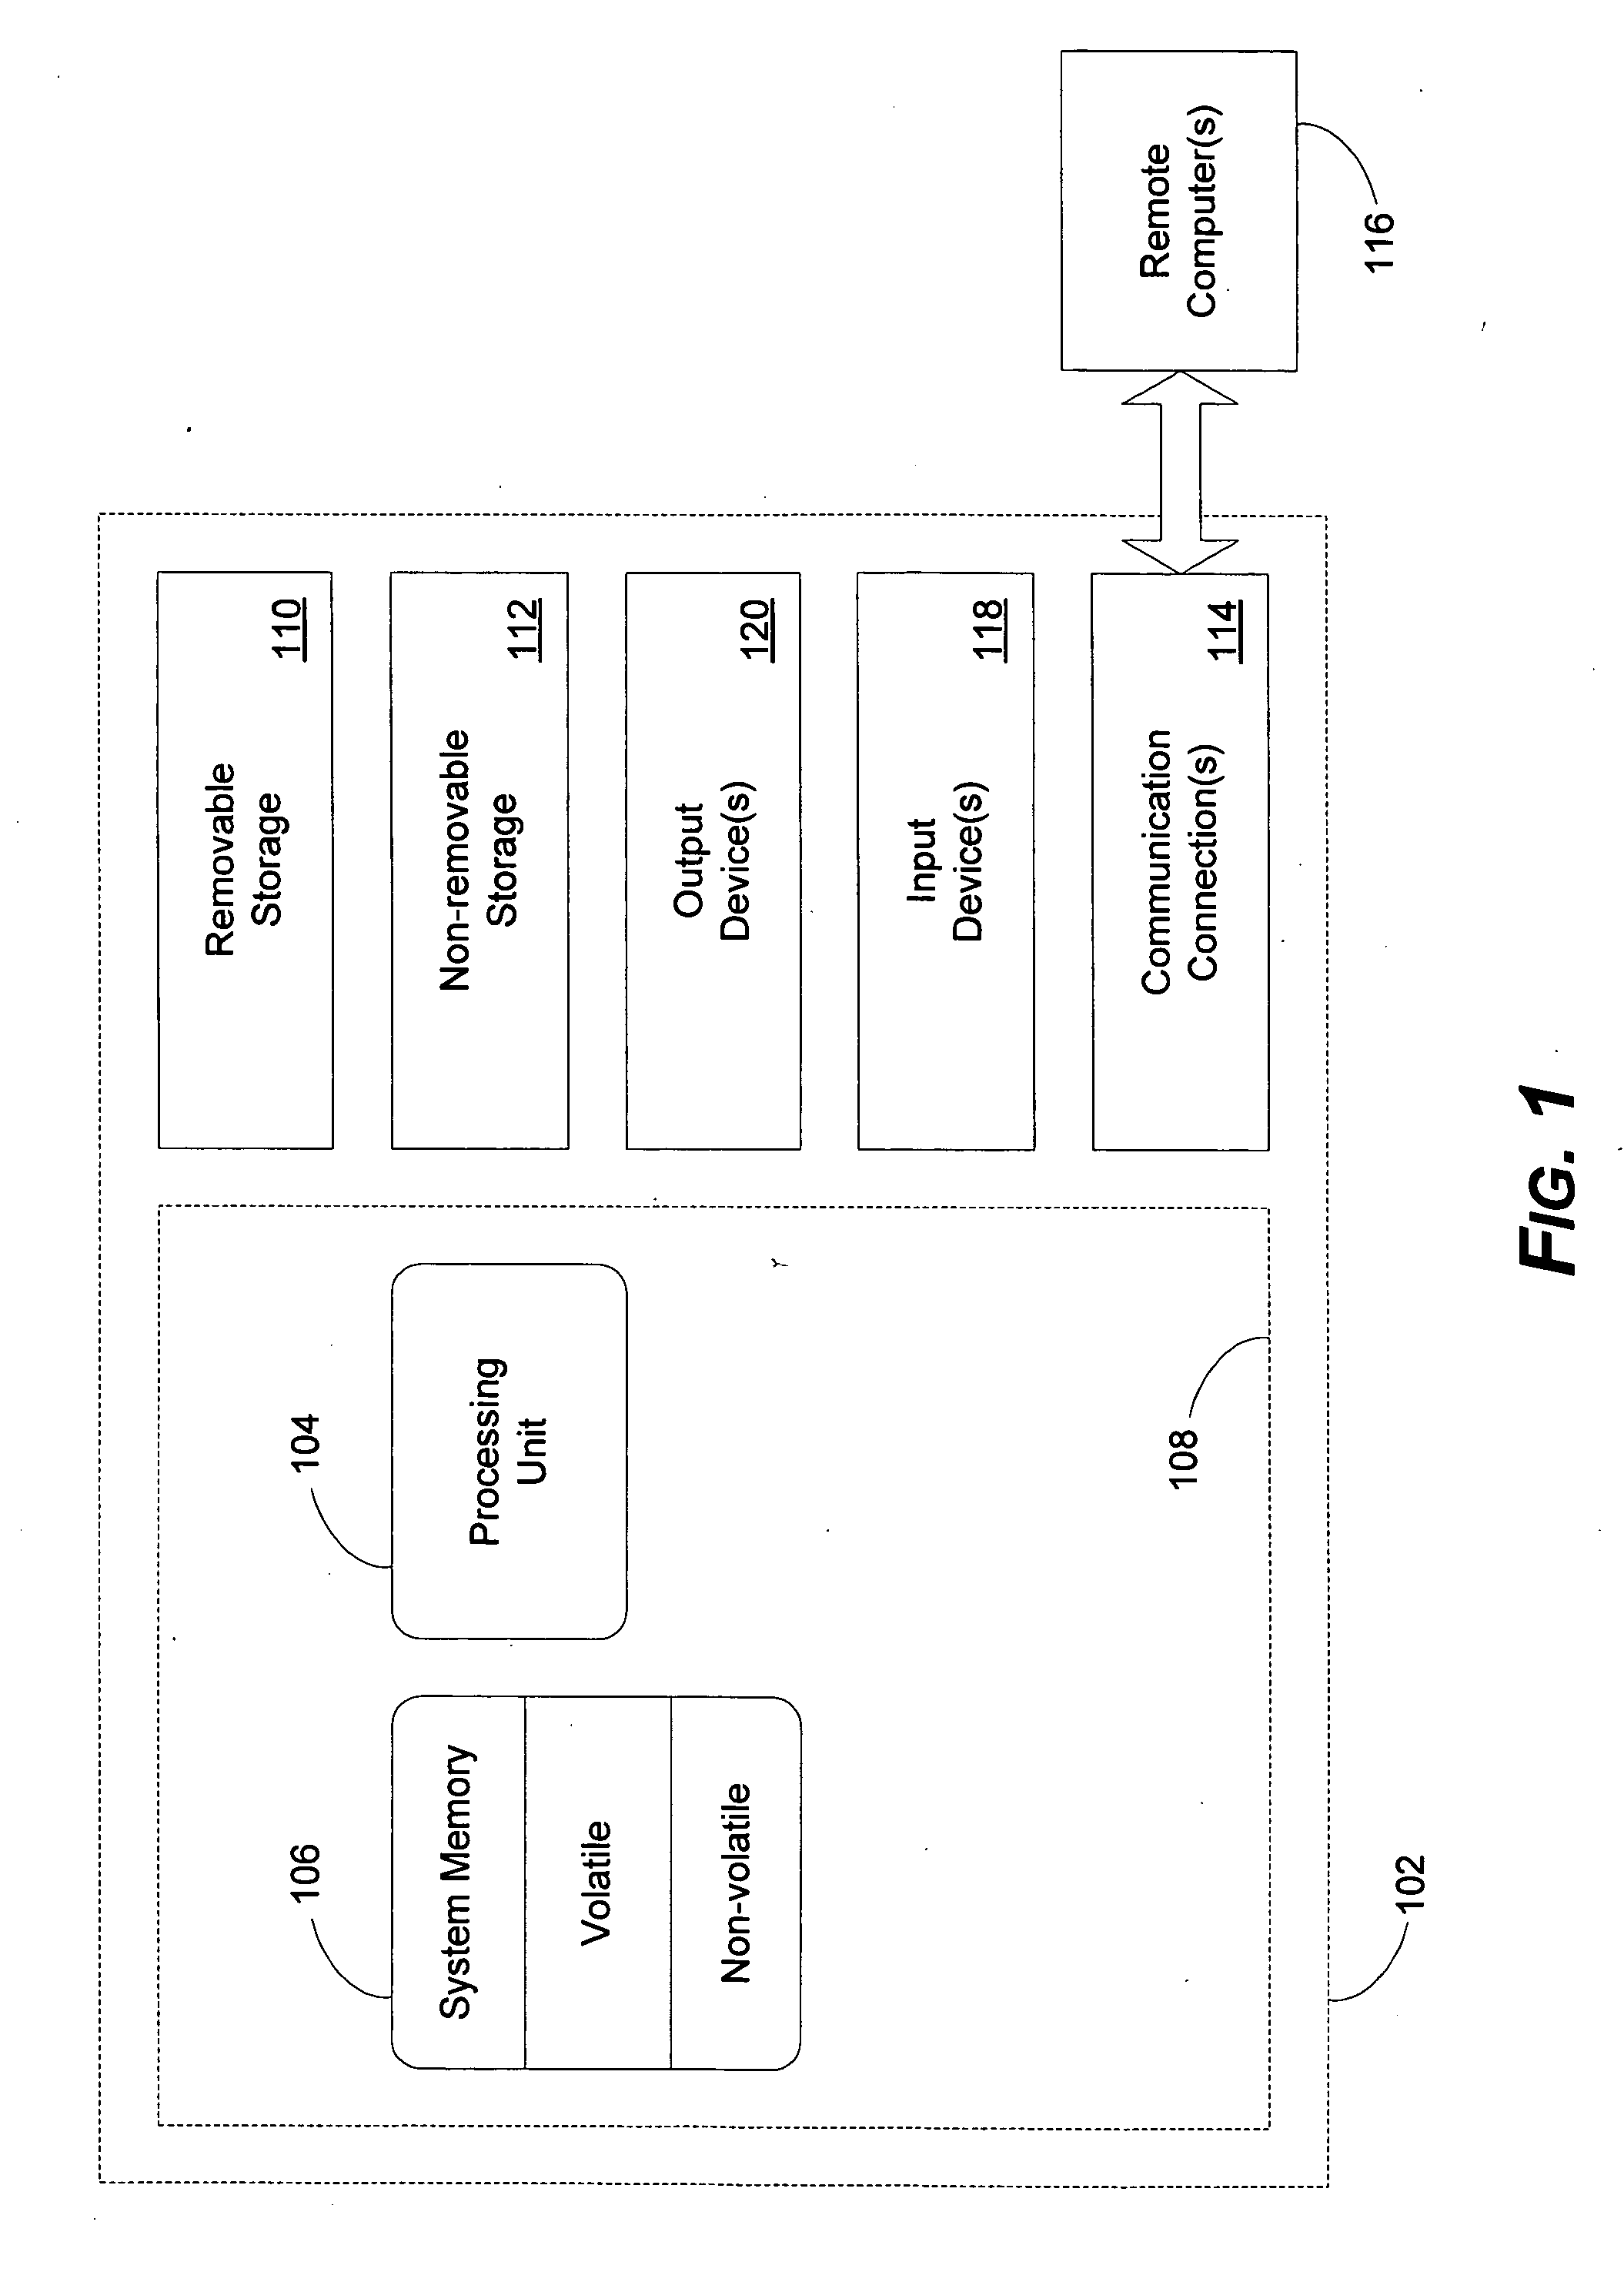 System and method for extensible computer assisted collaboration